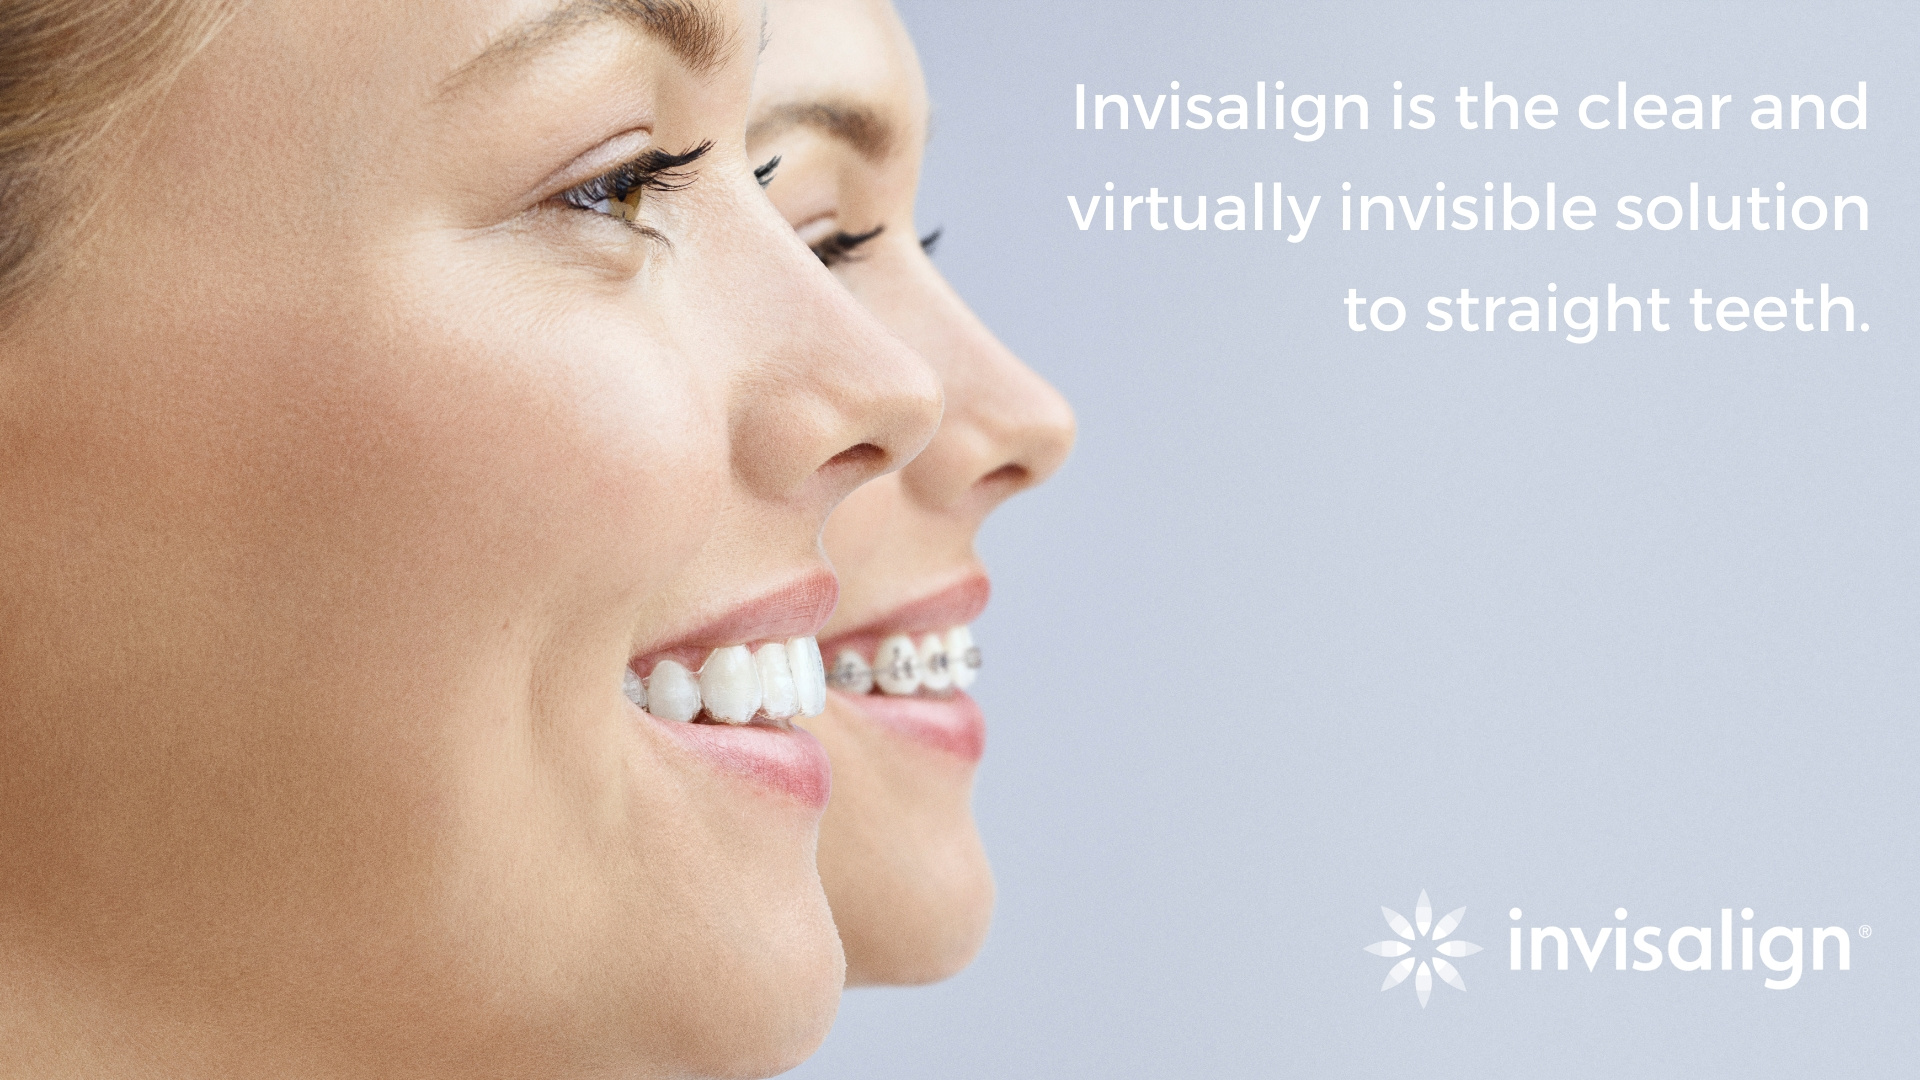 A woman wearing Invisalign clear aligners to treat crooked teeth